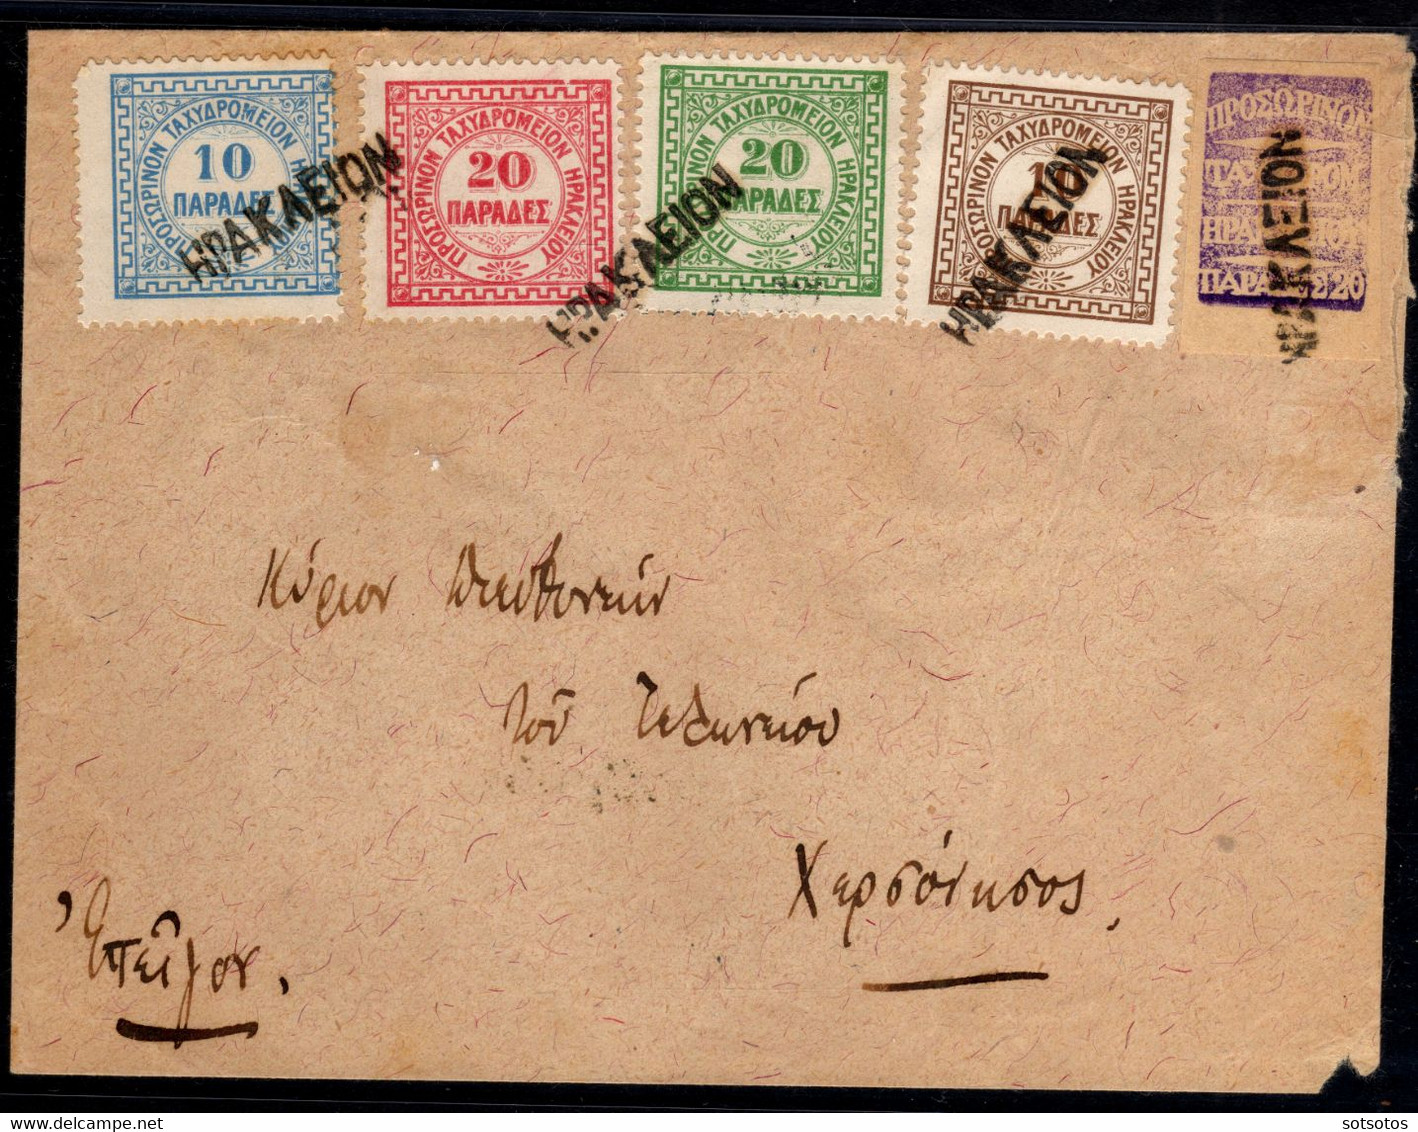 CRETE 1898: The Rarest Cover Of Cretan Post Offices, Bearing All 5 Stamps Of The British Post Office In Crete - Kreta